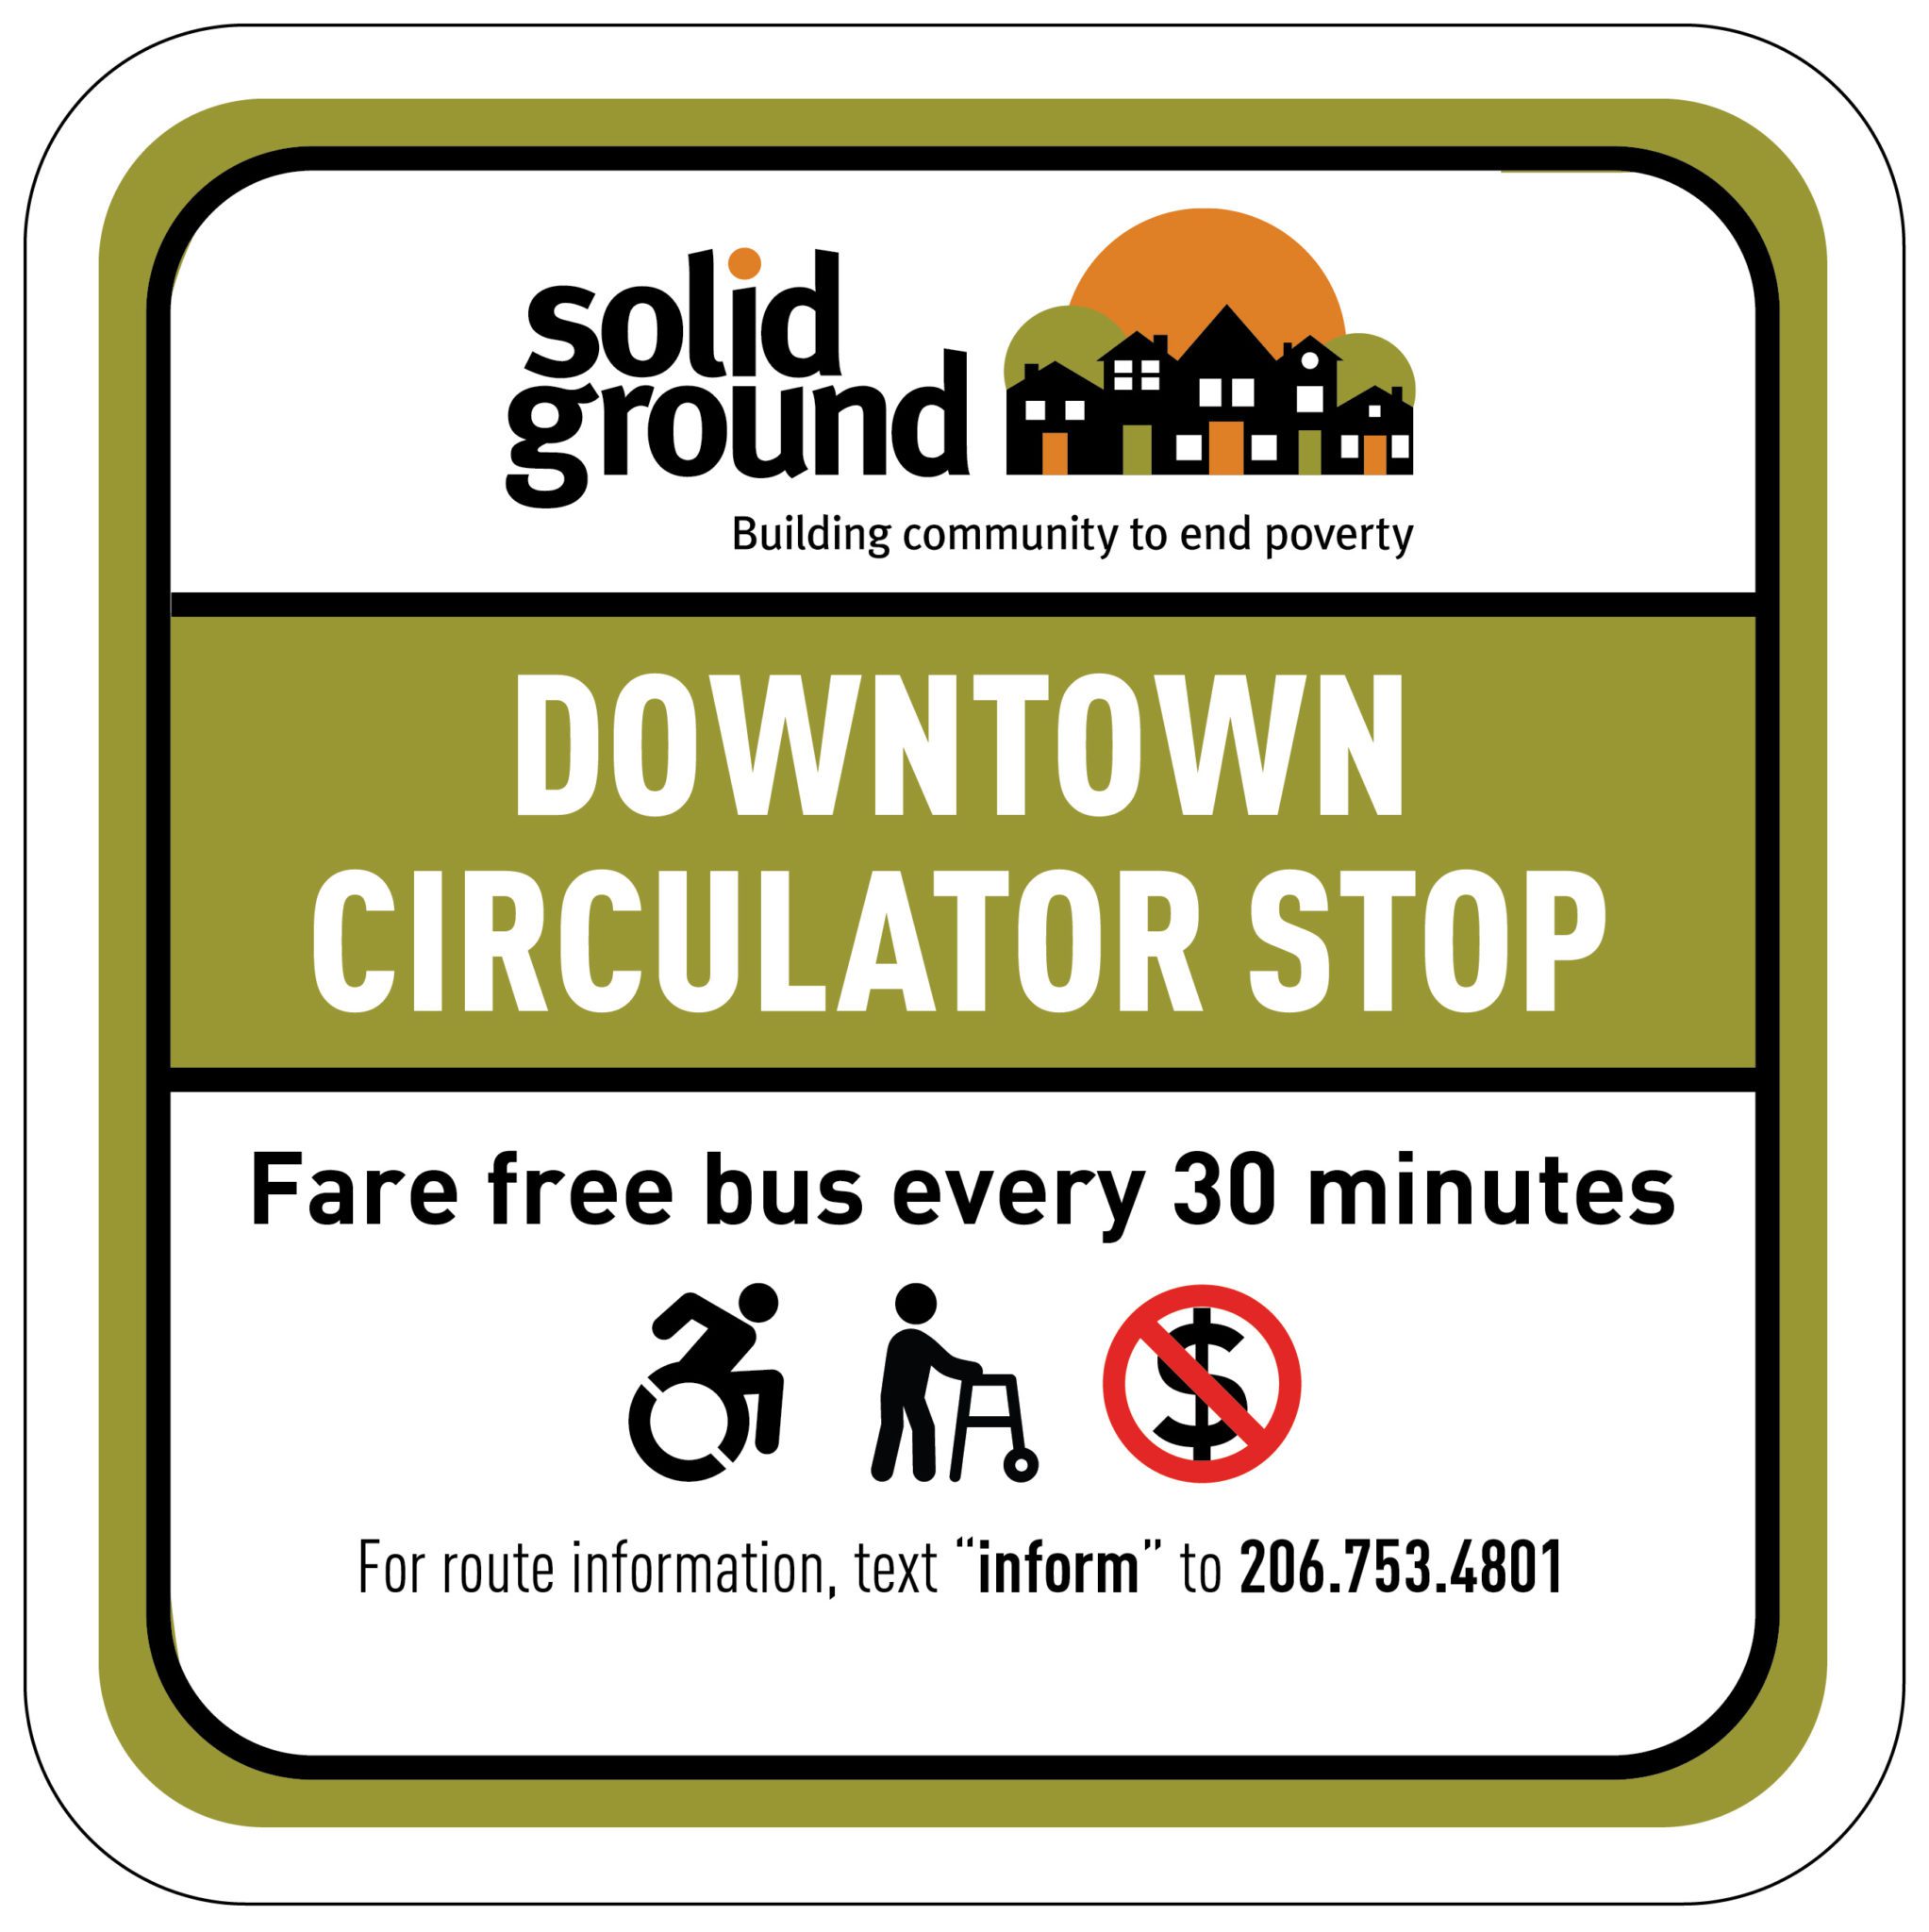 Downtown Circulator stop sign graphic, showing what the signs will look like. Large text says "downtown circulator stop" and icons show the buses as accessible and free. A phone number to text is provided of 206-753-4801.